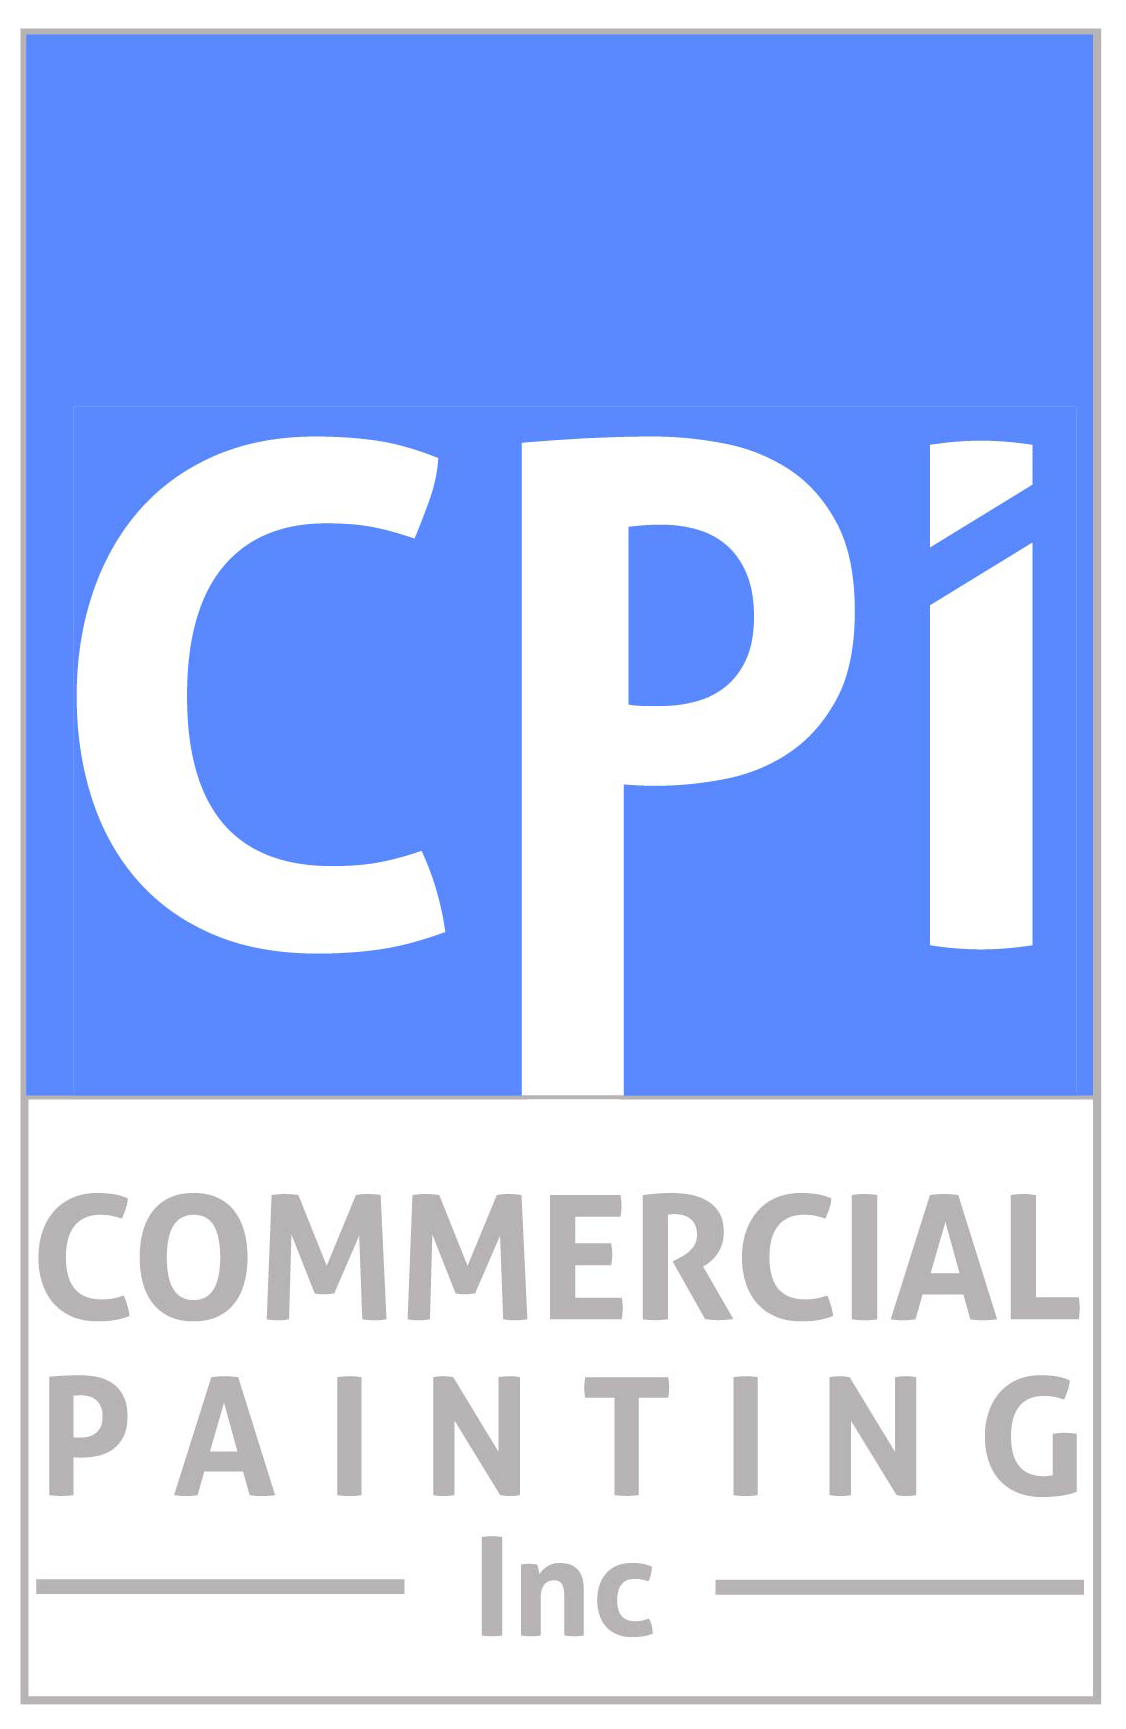 Commercial Painting, Inc.